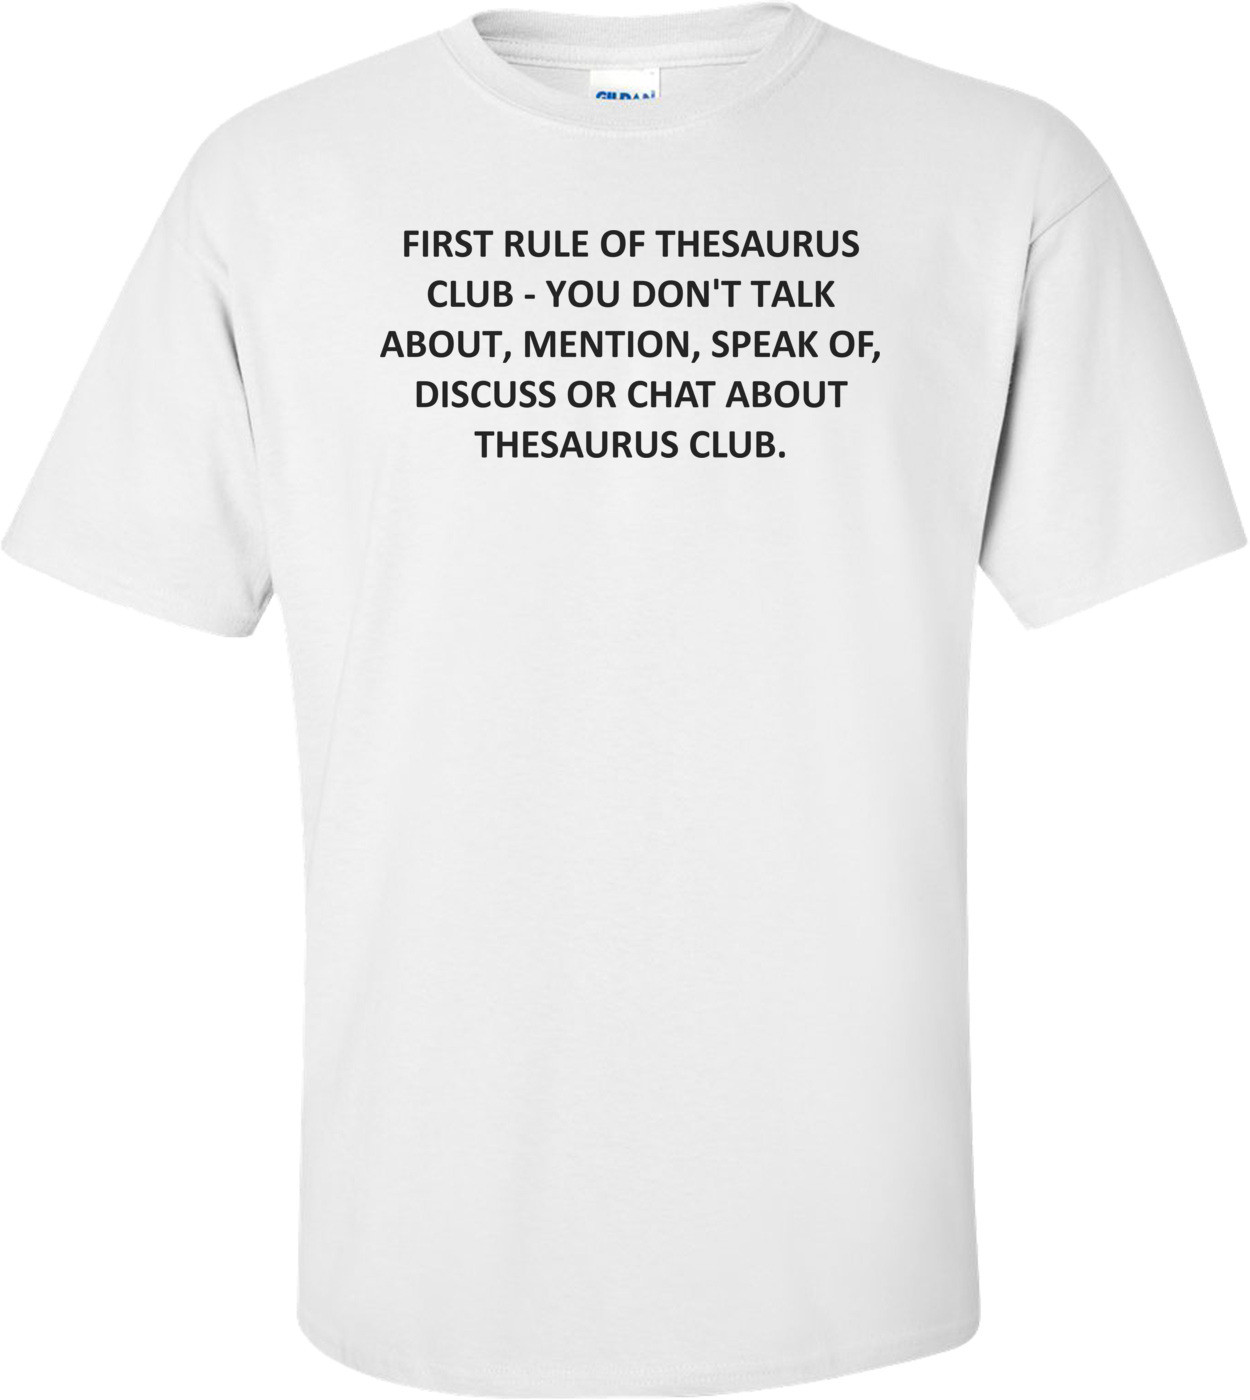 FIRST RULE OF THESAURUS CLUB - YOU DON'T TALK ABOUT, MENTION, SPEAK OF, DISCUSS OR CHAT ABOUT THESAURUS CLUB.